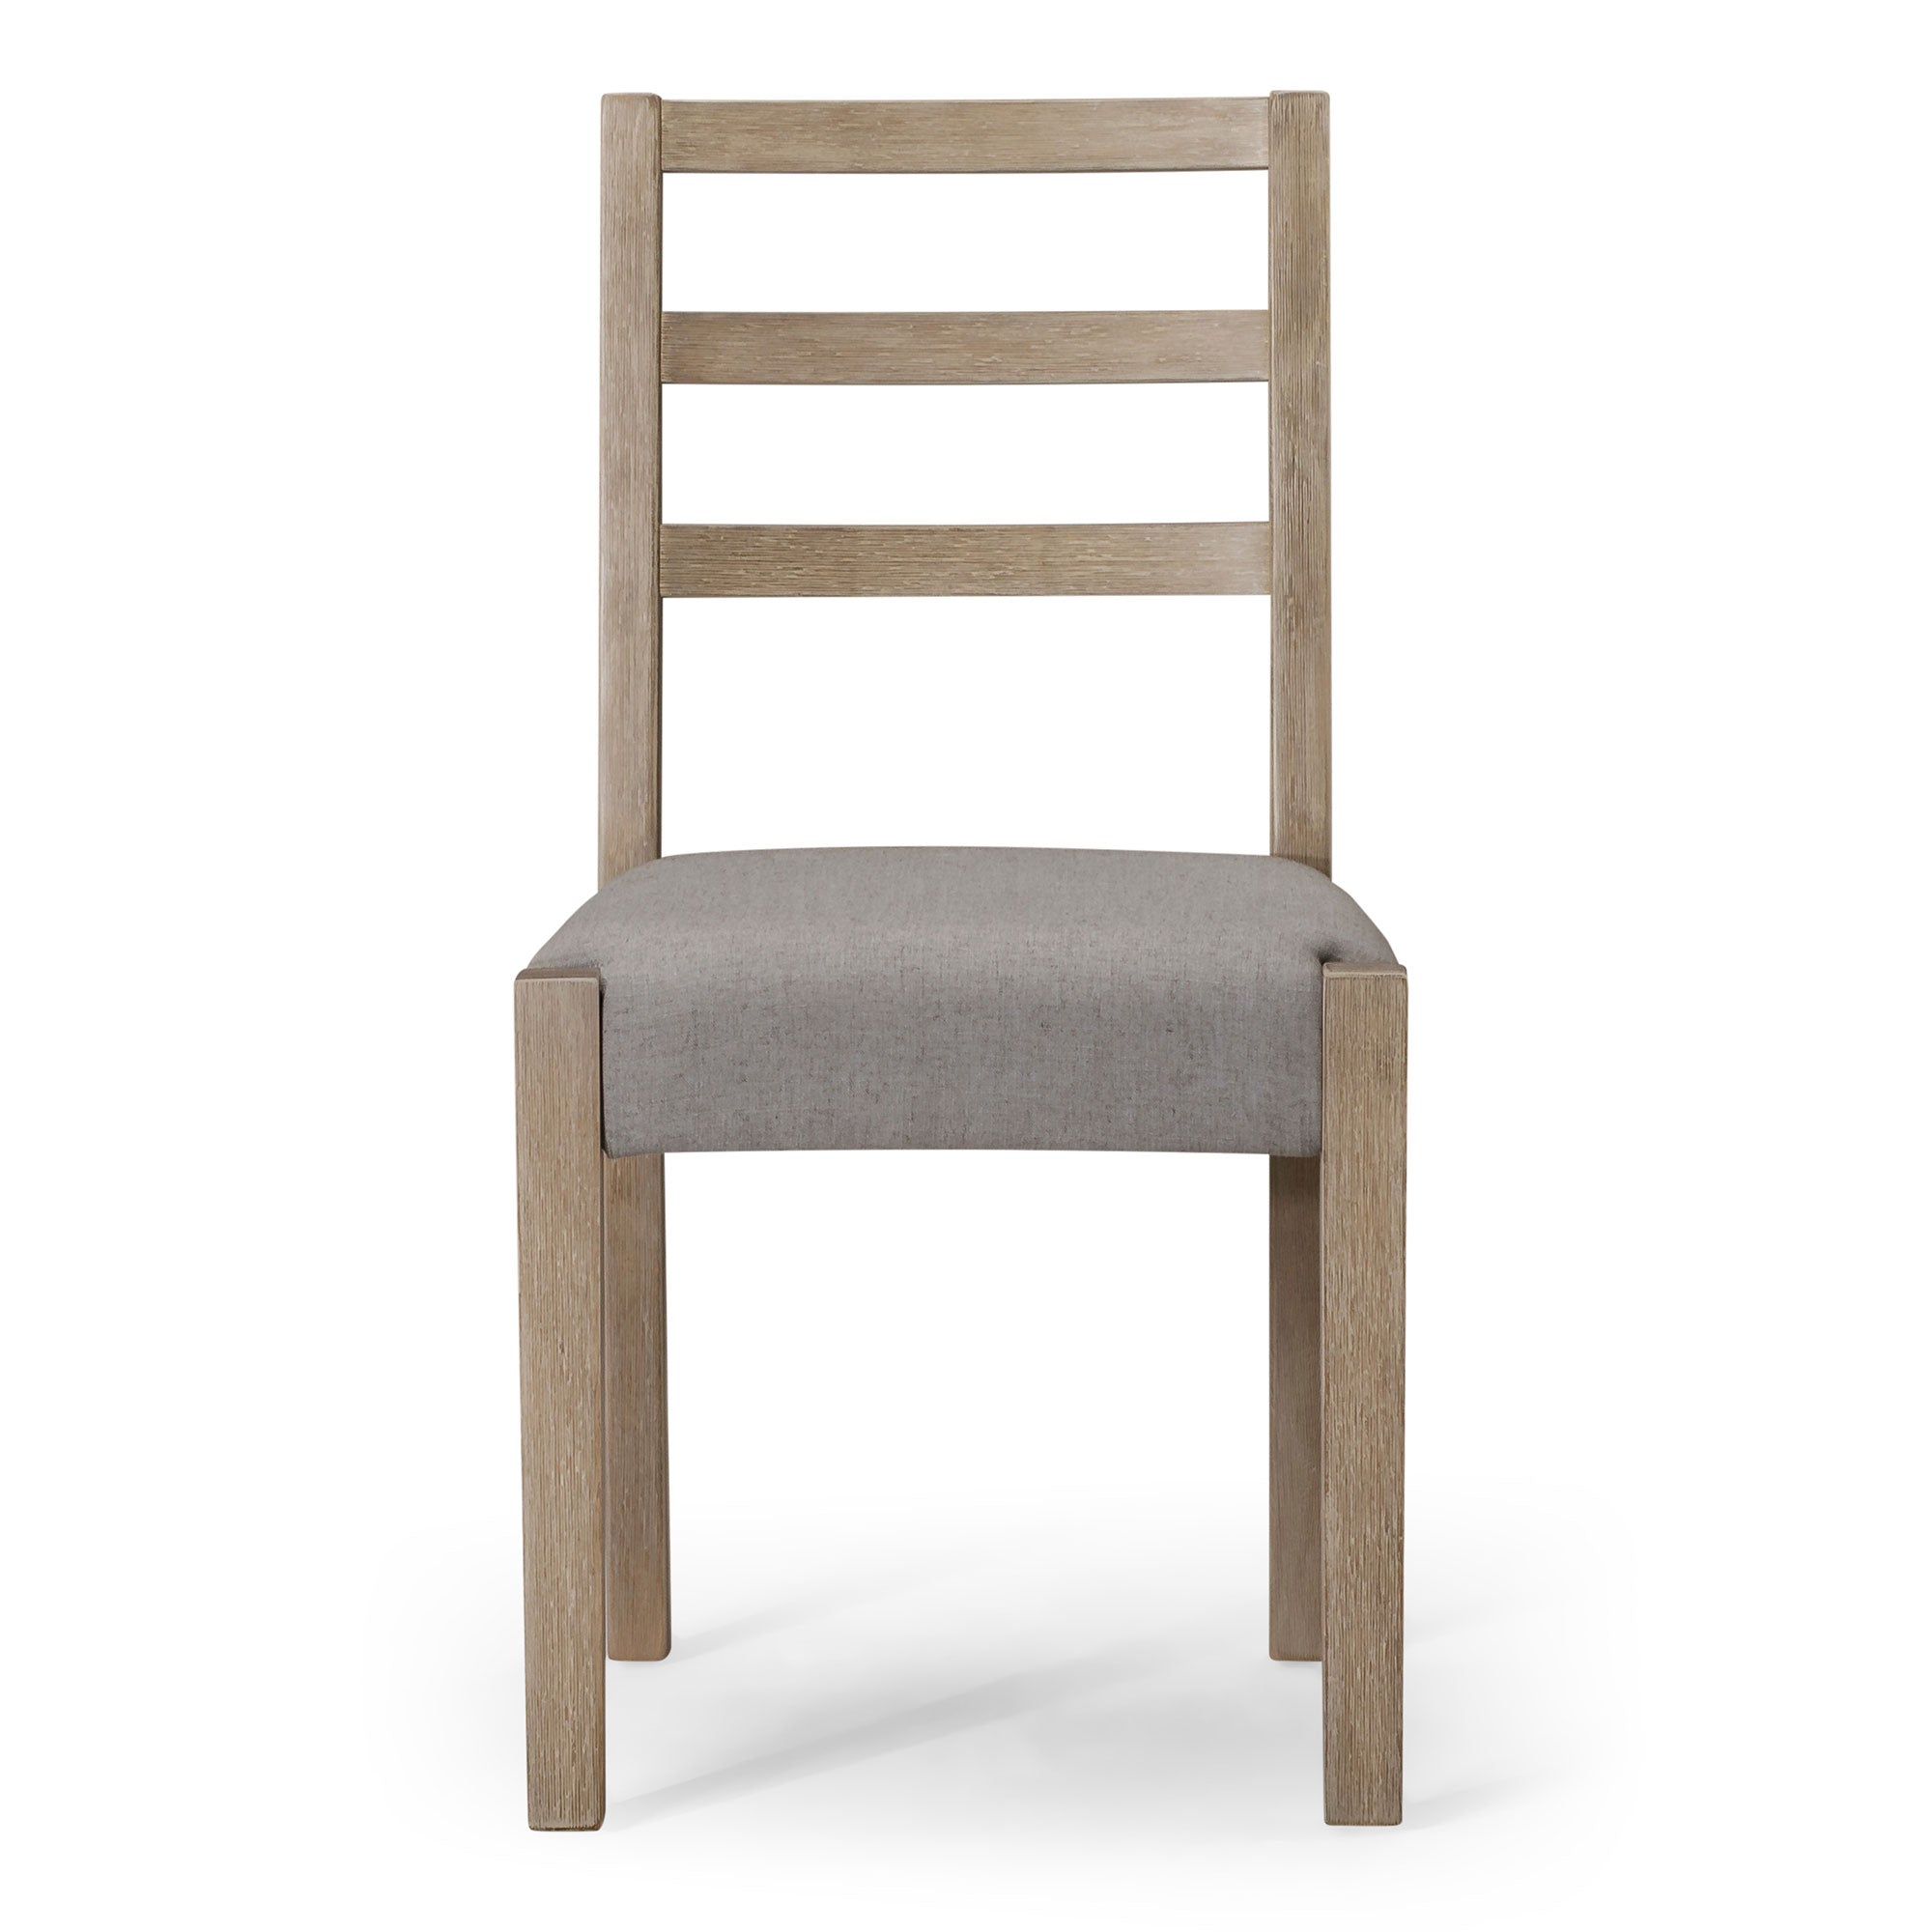 Willow Organic Wooden Dining Chair in Weathered Grey Finish with Slate Linen Fabric Upholstery, Set of 2 in Dining Furniture by Maven Lane